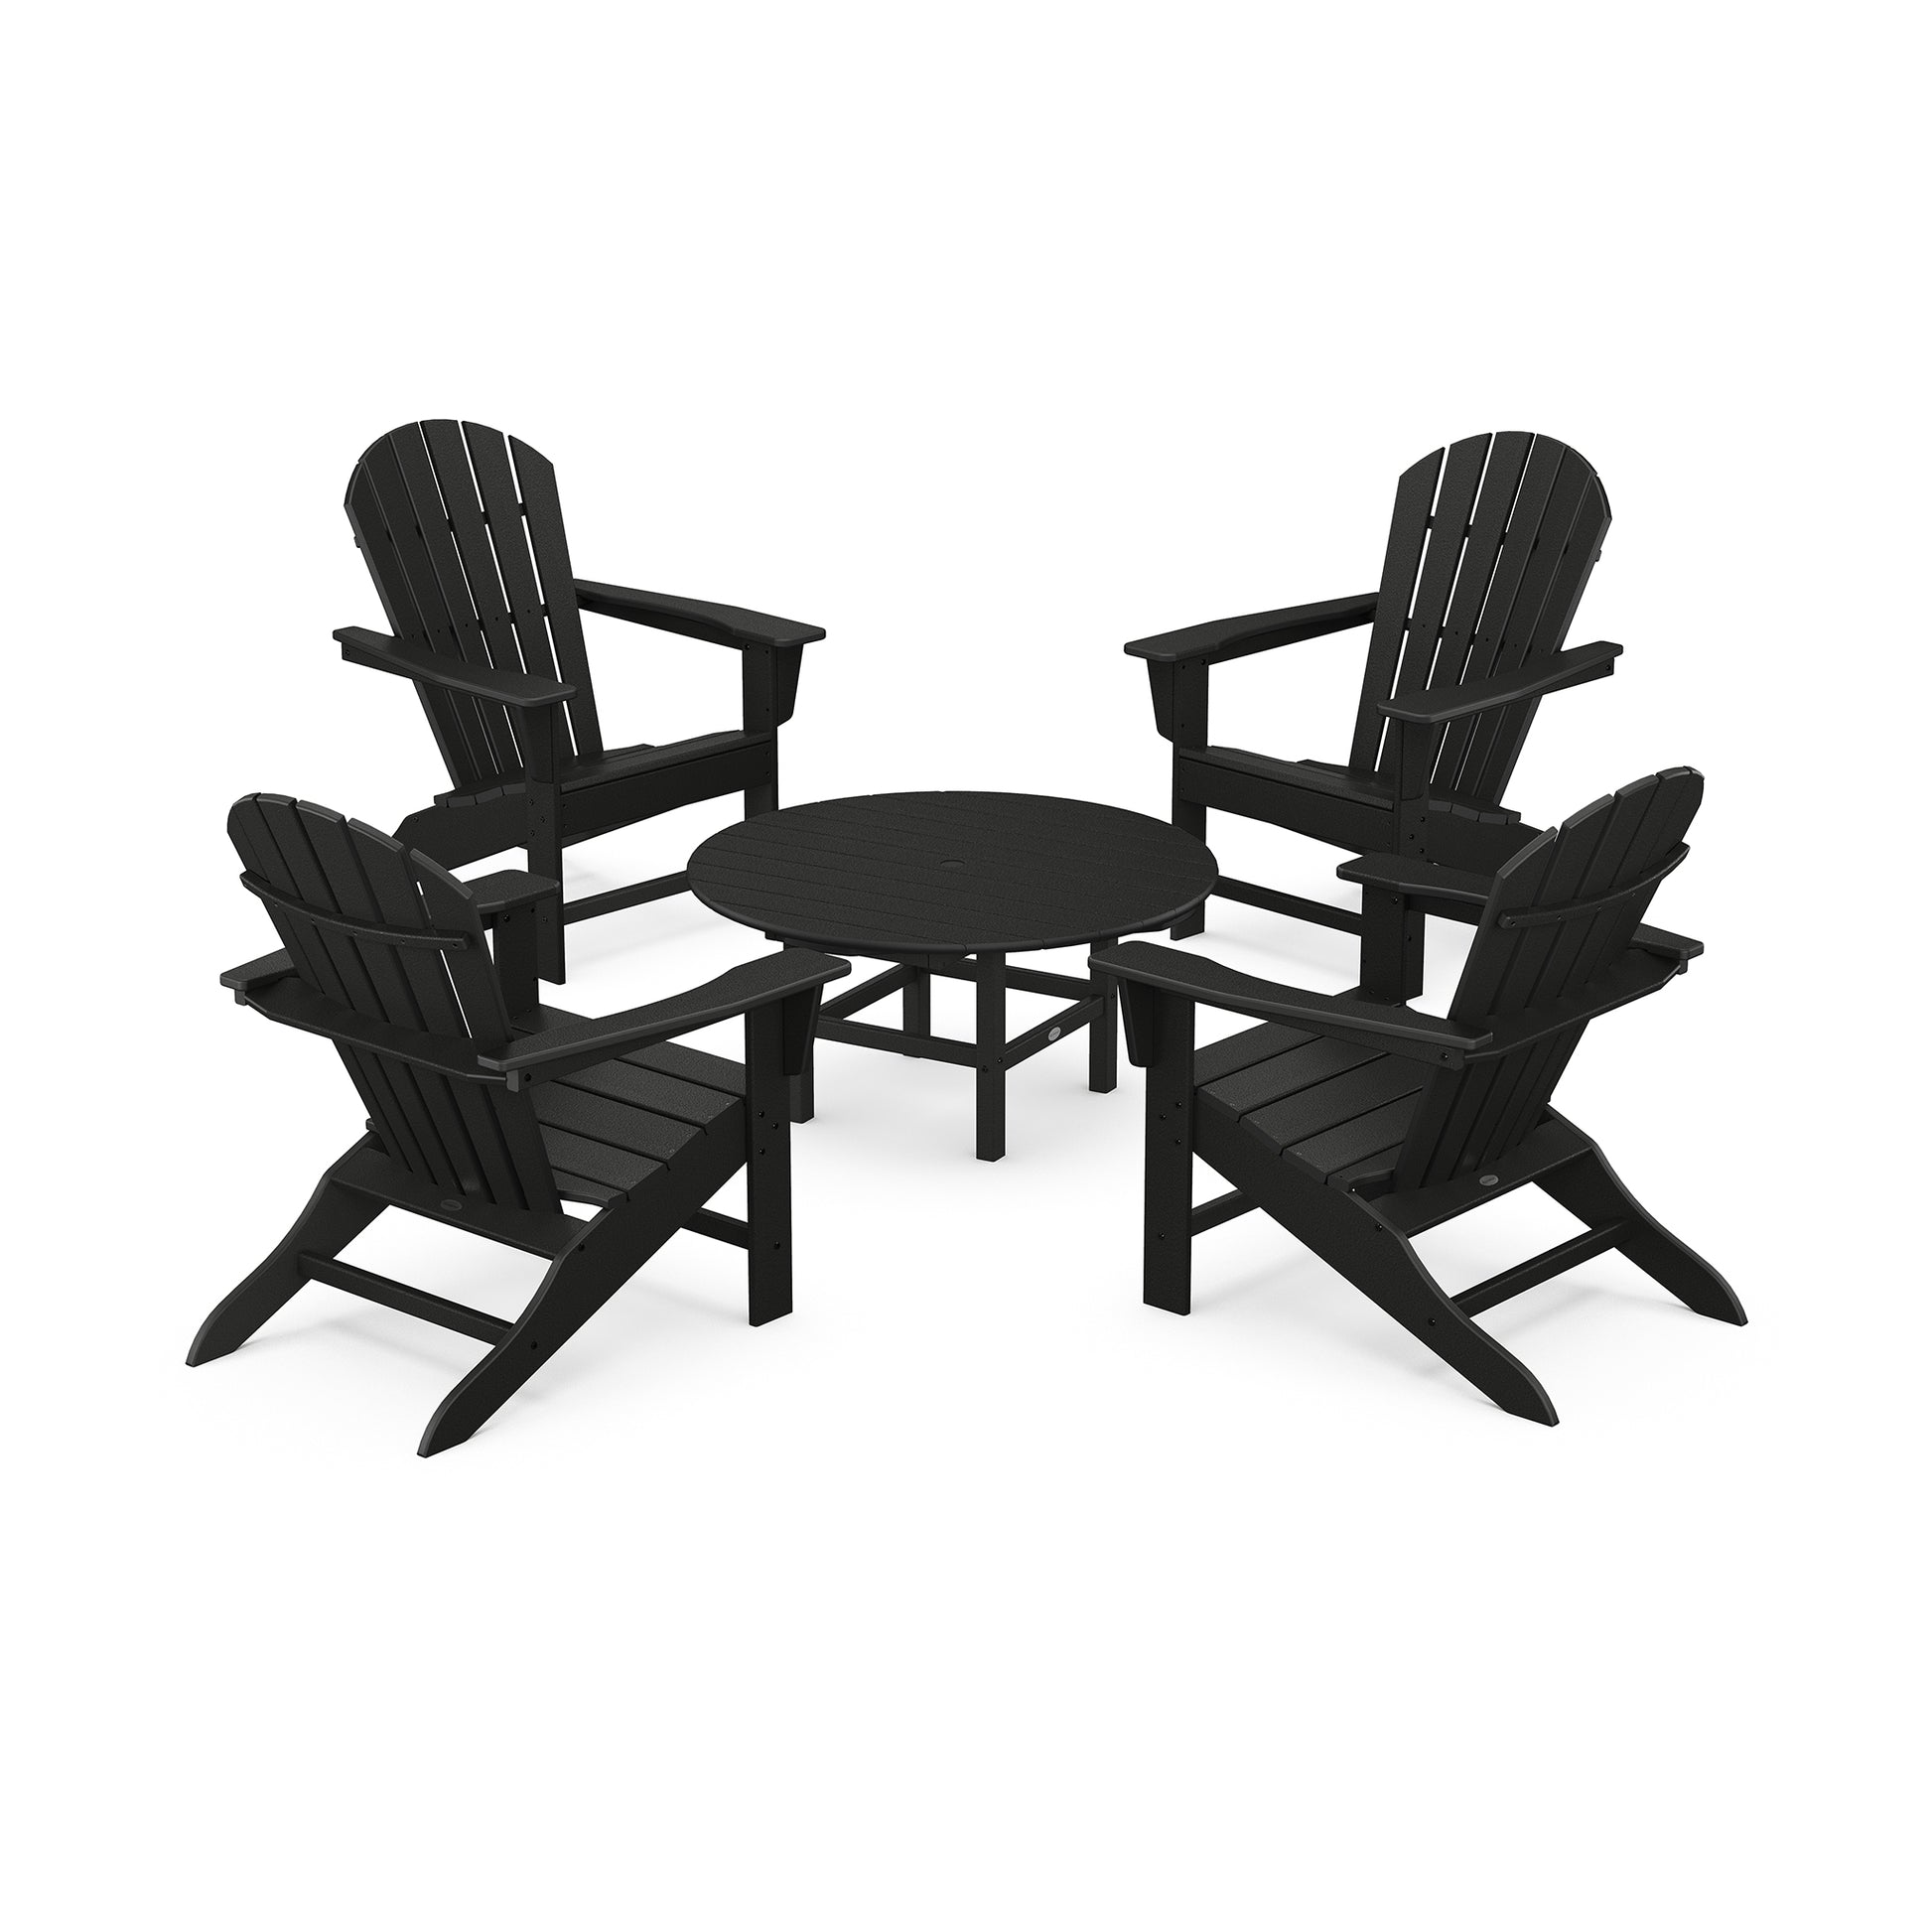 Four black POLYWOOD South Beach Adirondack chairs arranged around a small matching circular table on a white background. The setup suggests a casual outdoor seating area.